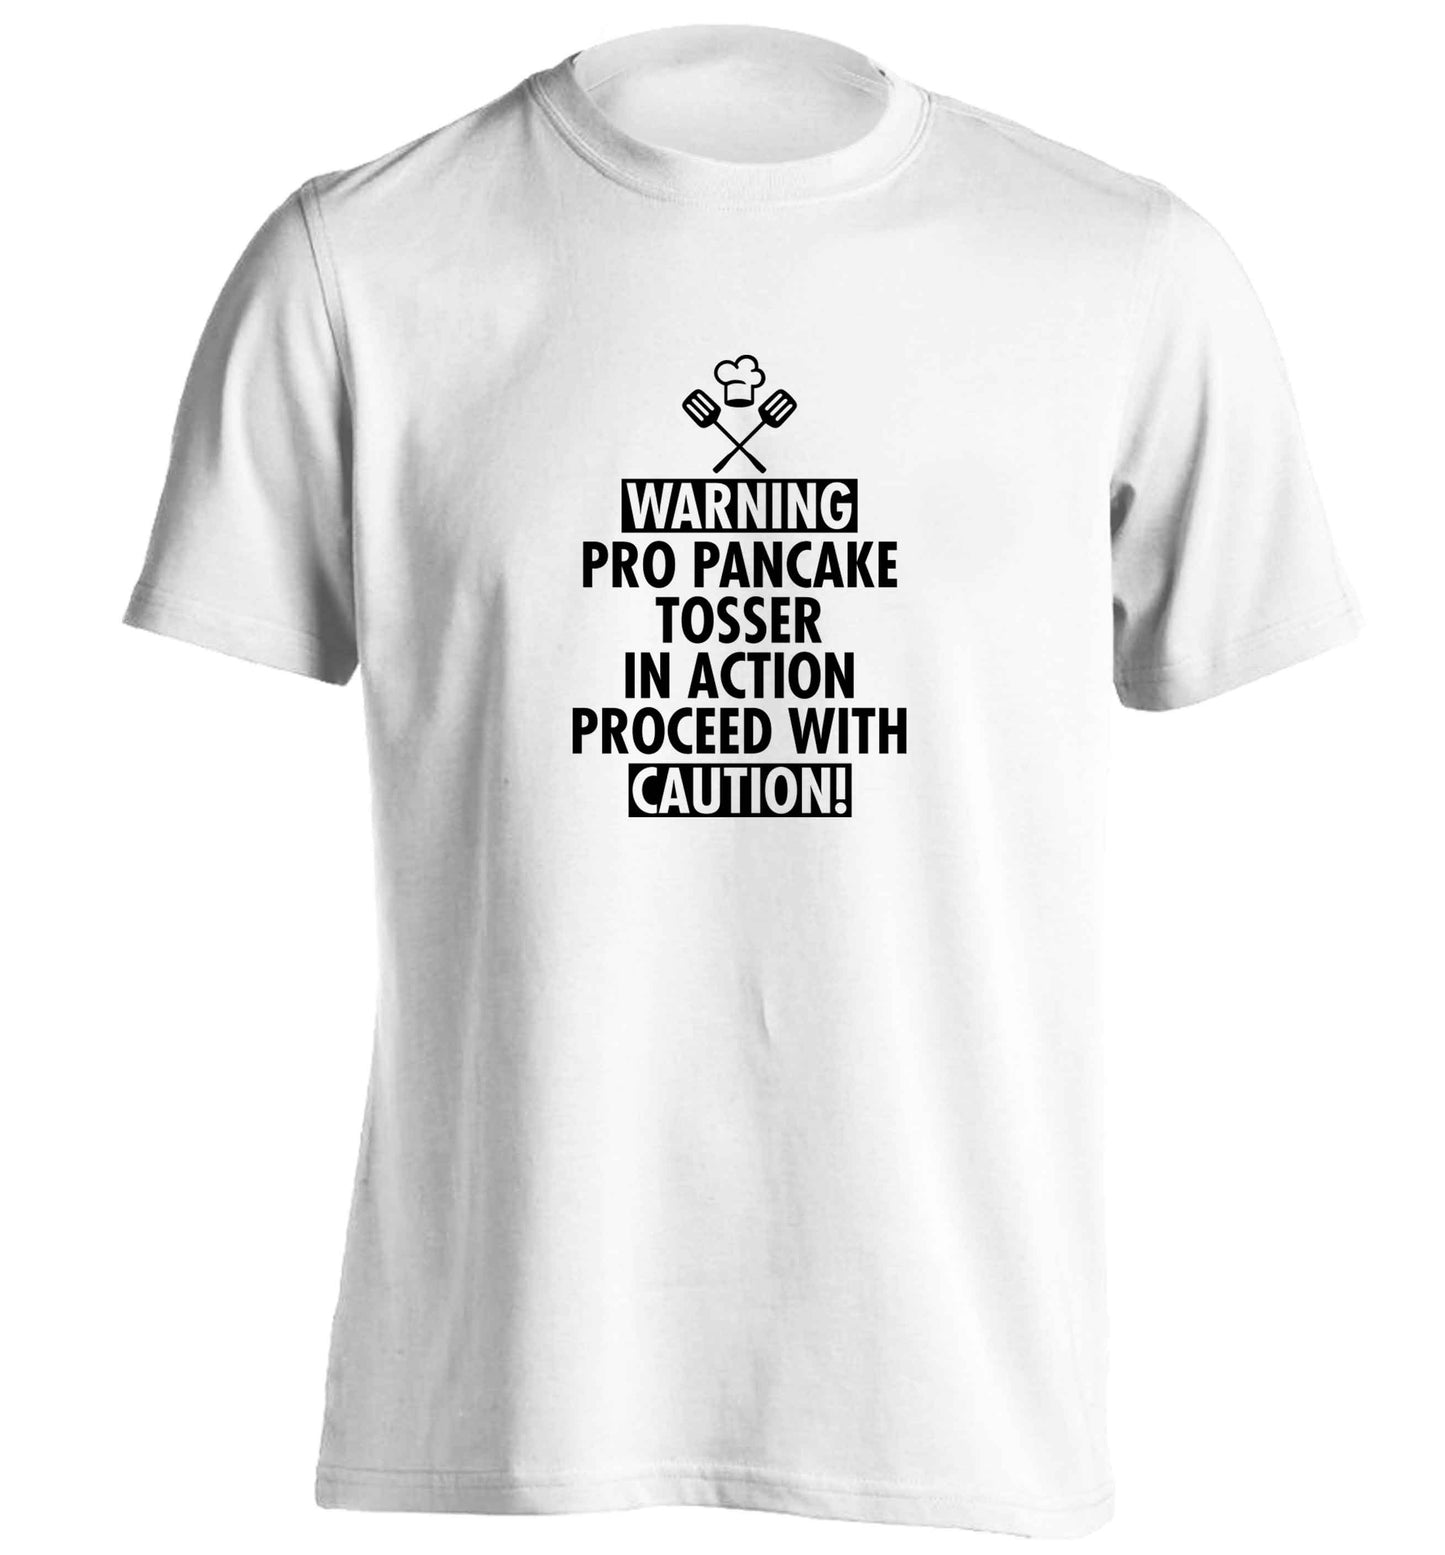 Warning pro pancake tosser in action proceed with caution adults unisex white Tshirt 2XL